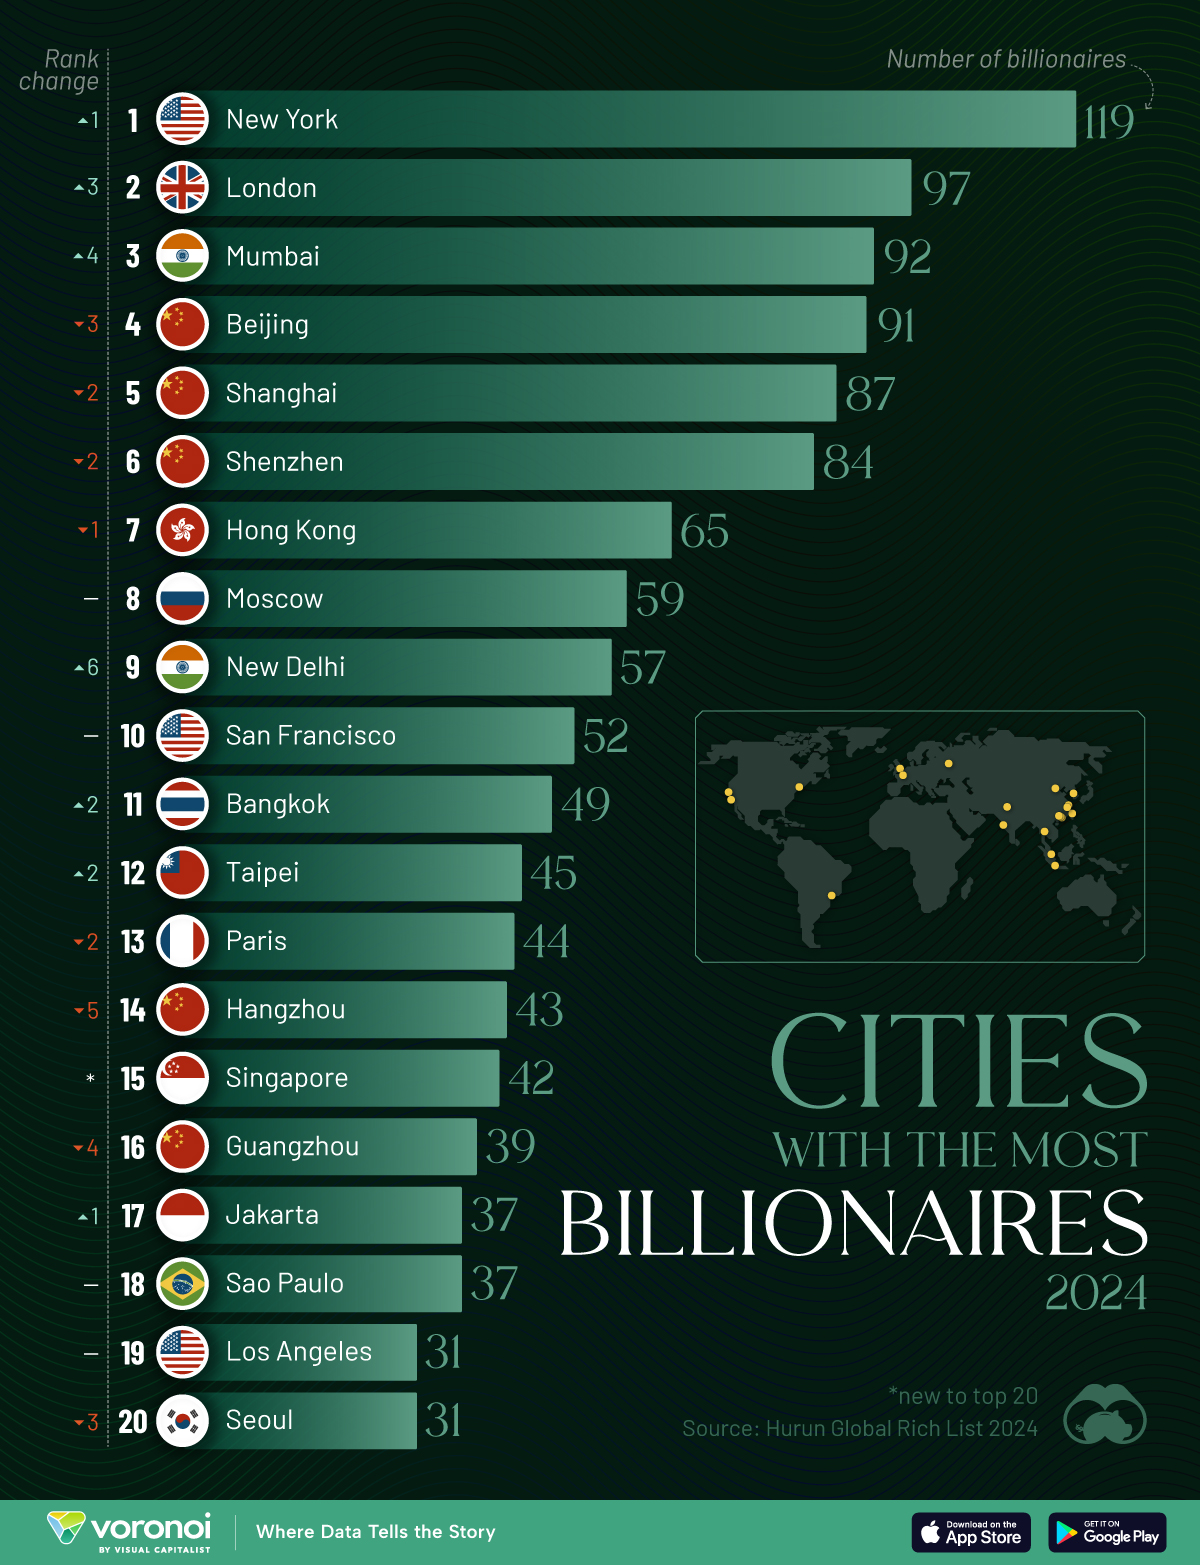 A cropped bar chart ranking the top 20 cities with the most billionaires in 2024.